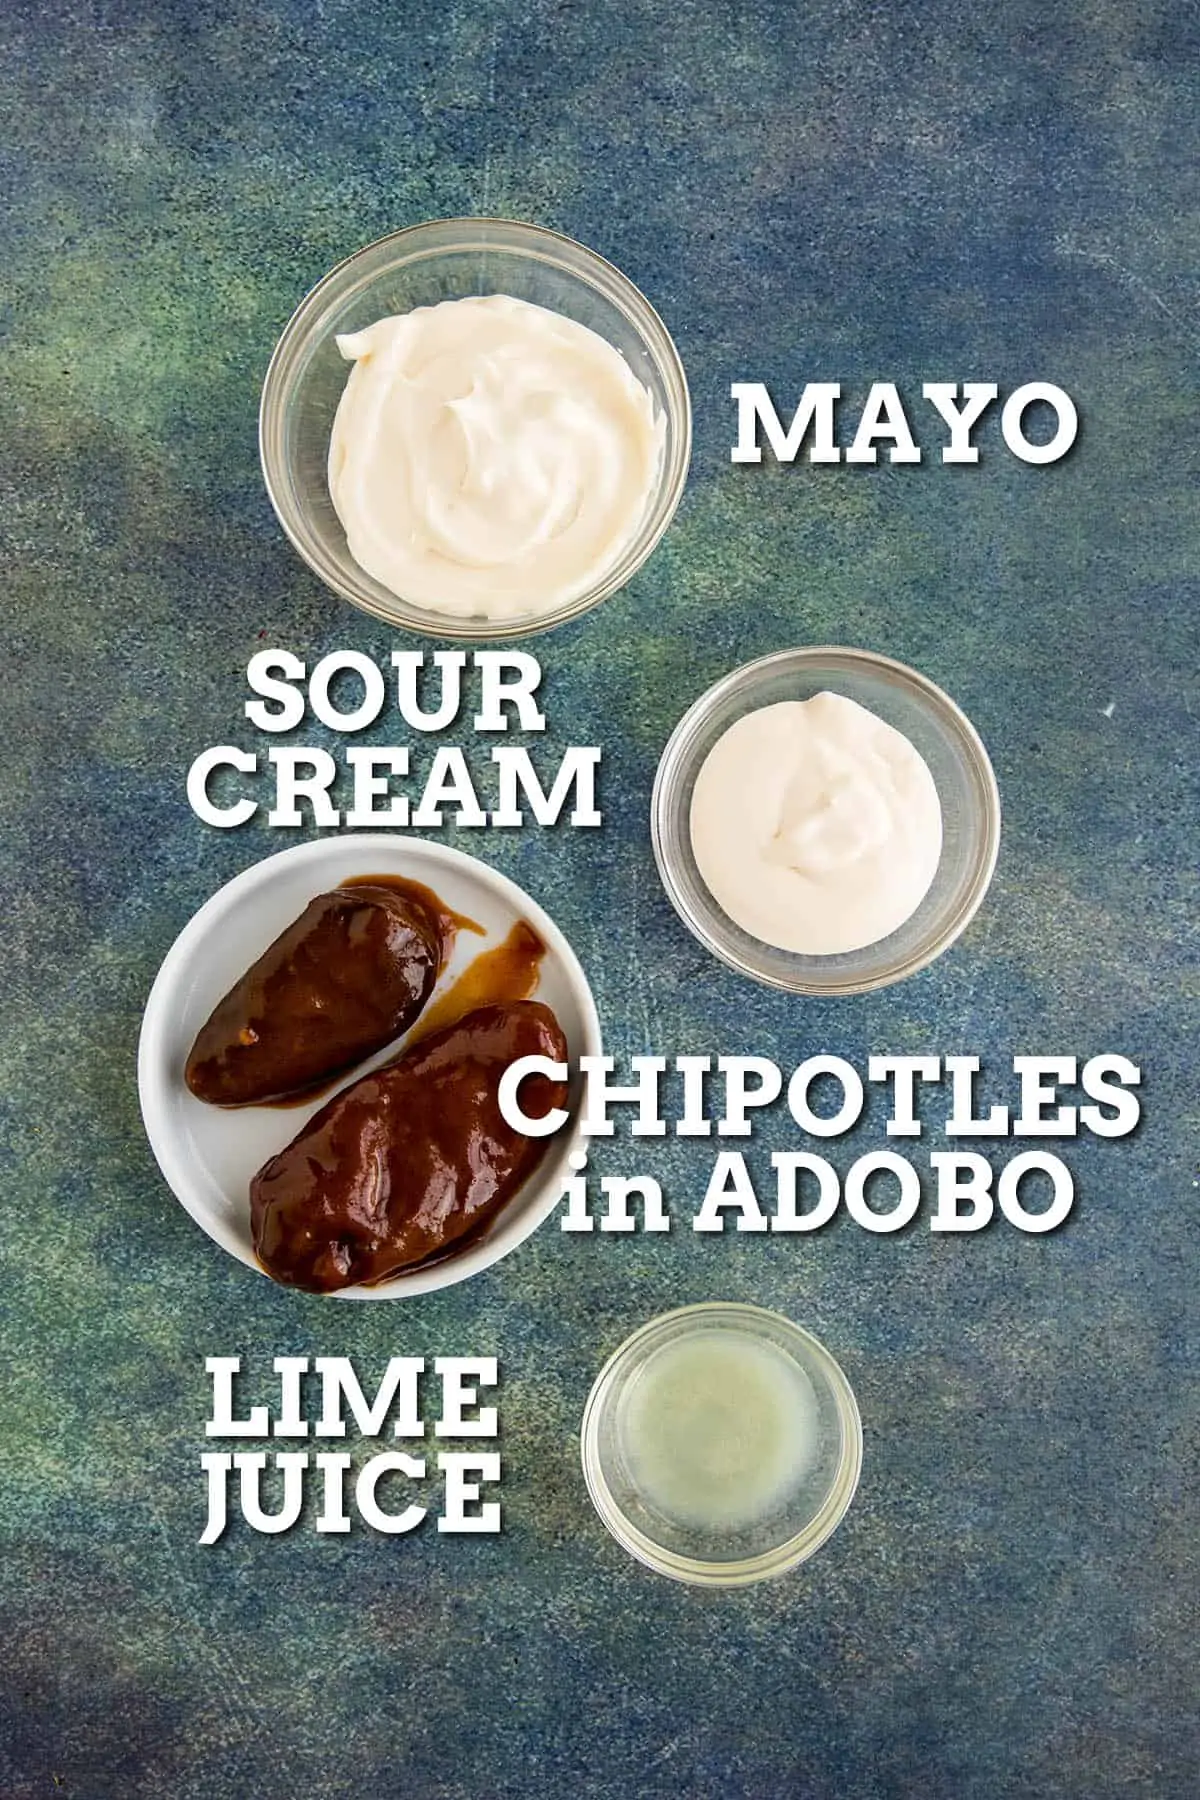 Chipotle Mayo ingredients